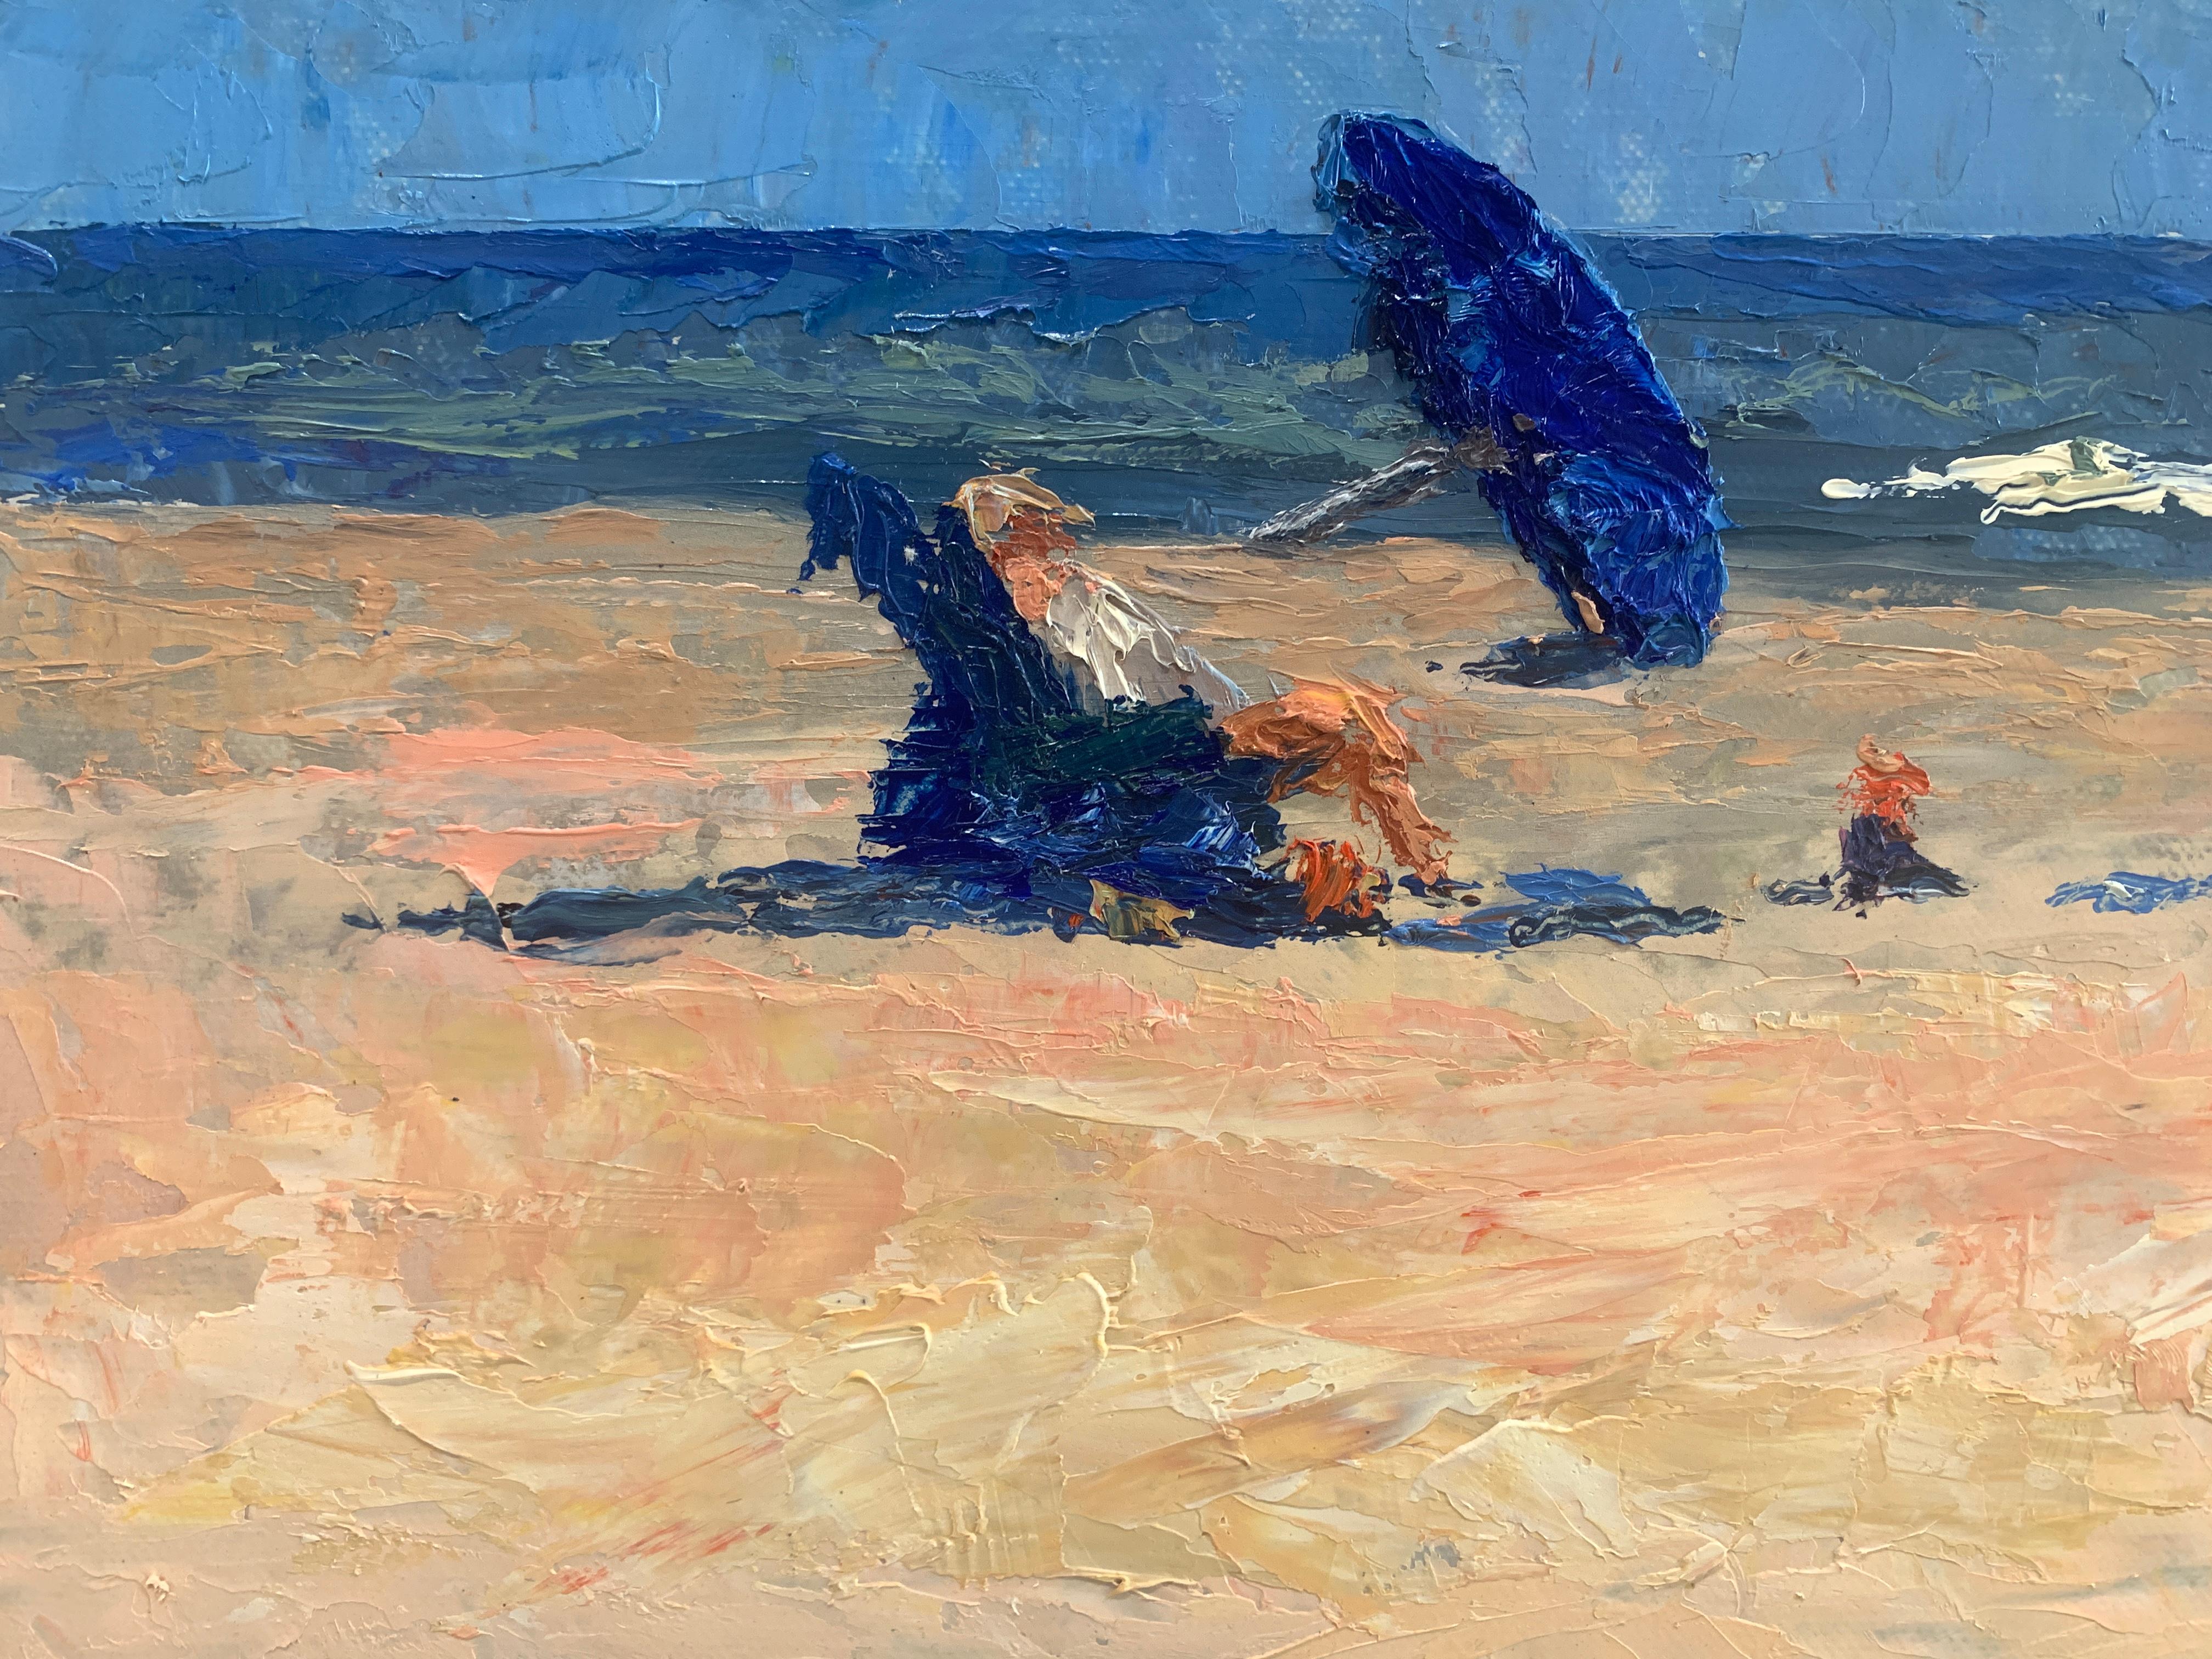 Coopers Beach I, 08.01.2020 - American Impressionist Painting by Nelson H. White